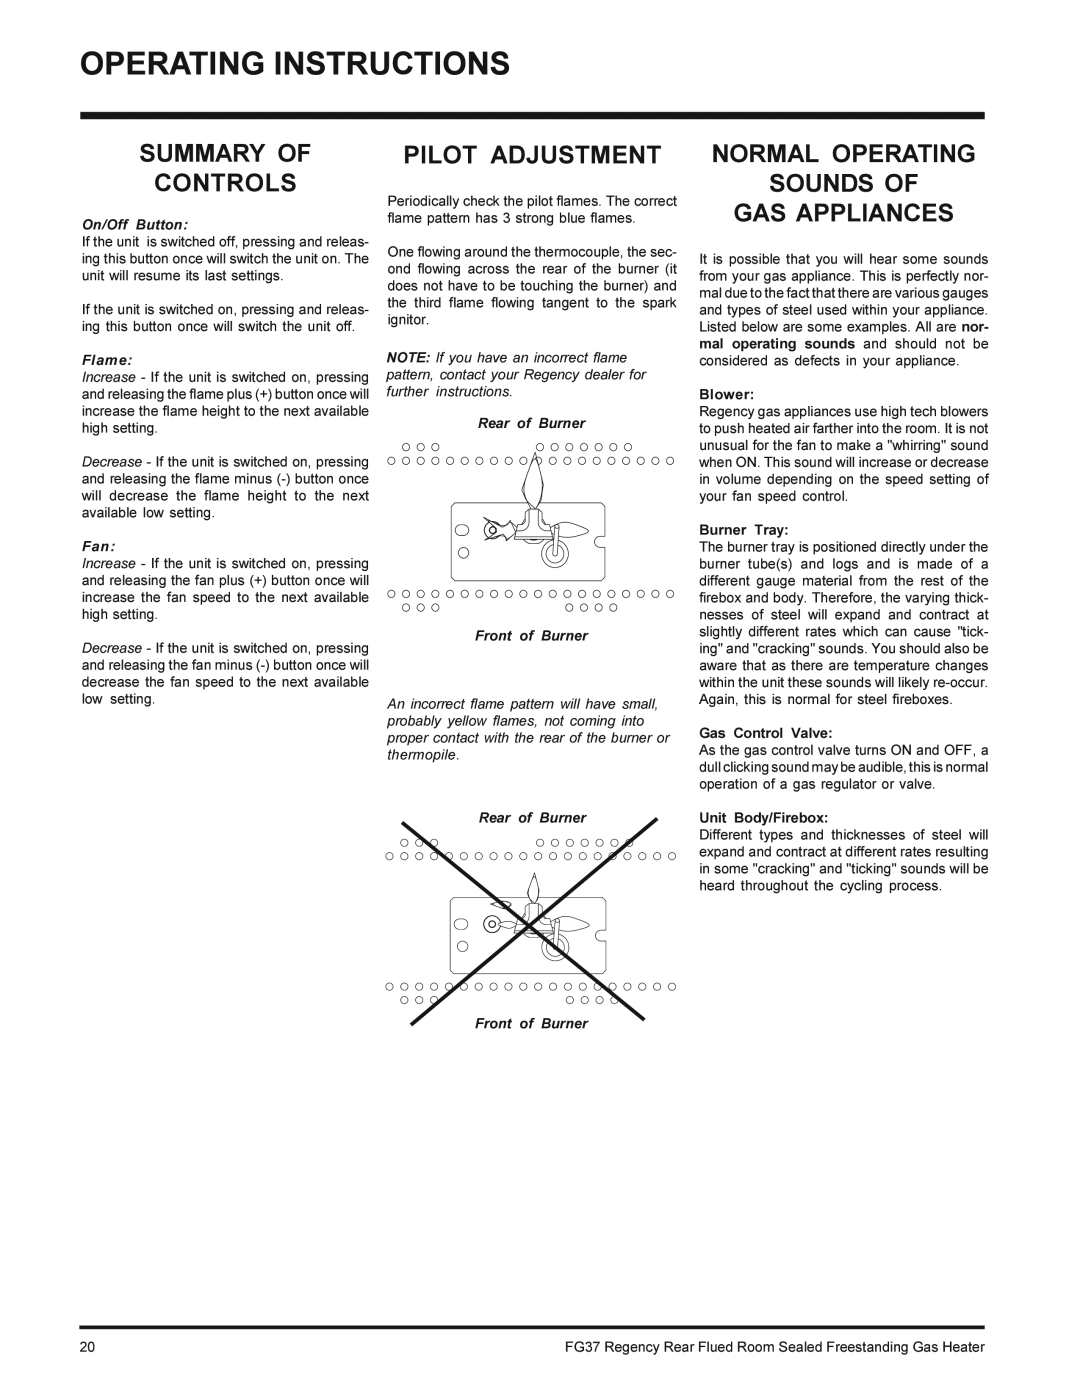 Regency FG37-LPG Summary Of Controls, Pilot Adjustment, Normal Operating Sounds Of Gas Appliances, On/Off Button, Flame 